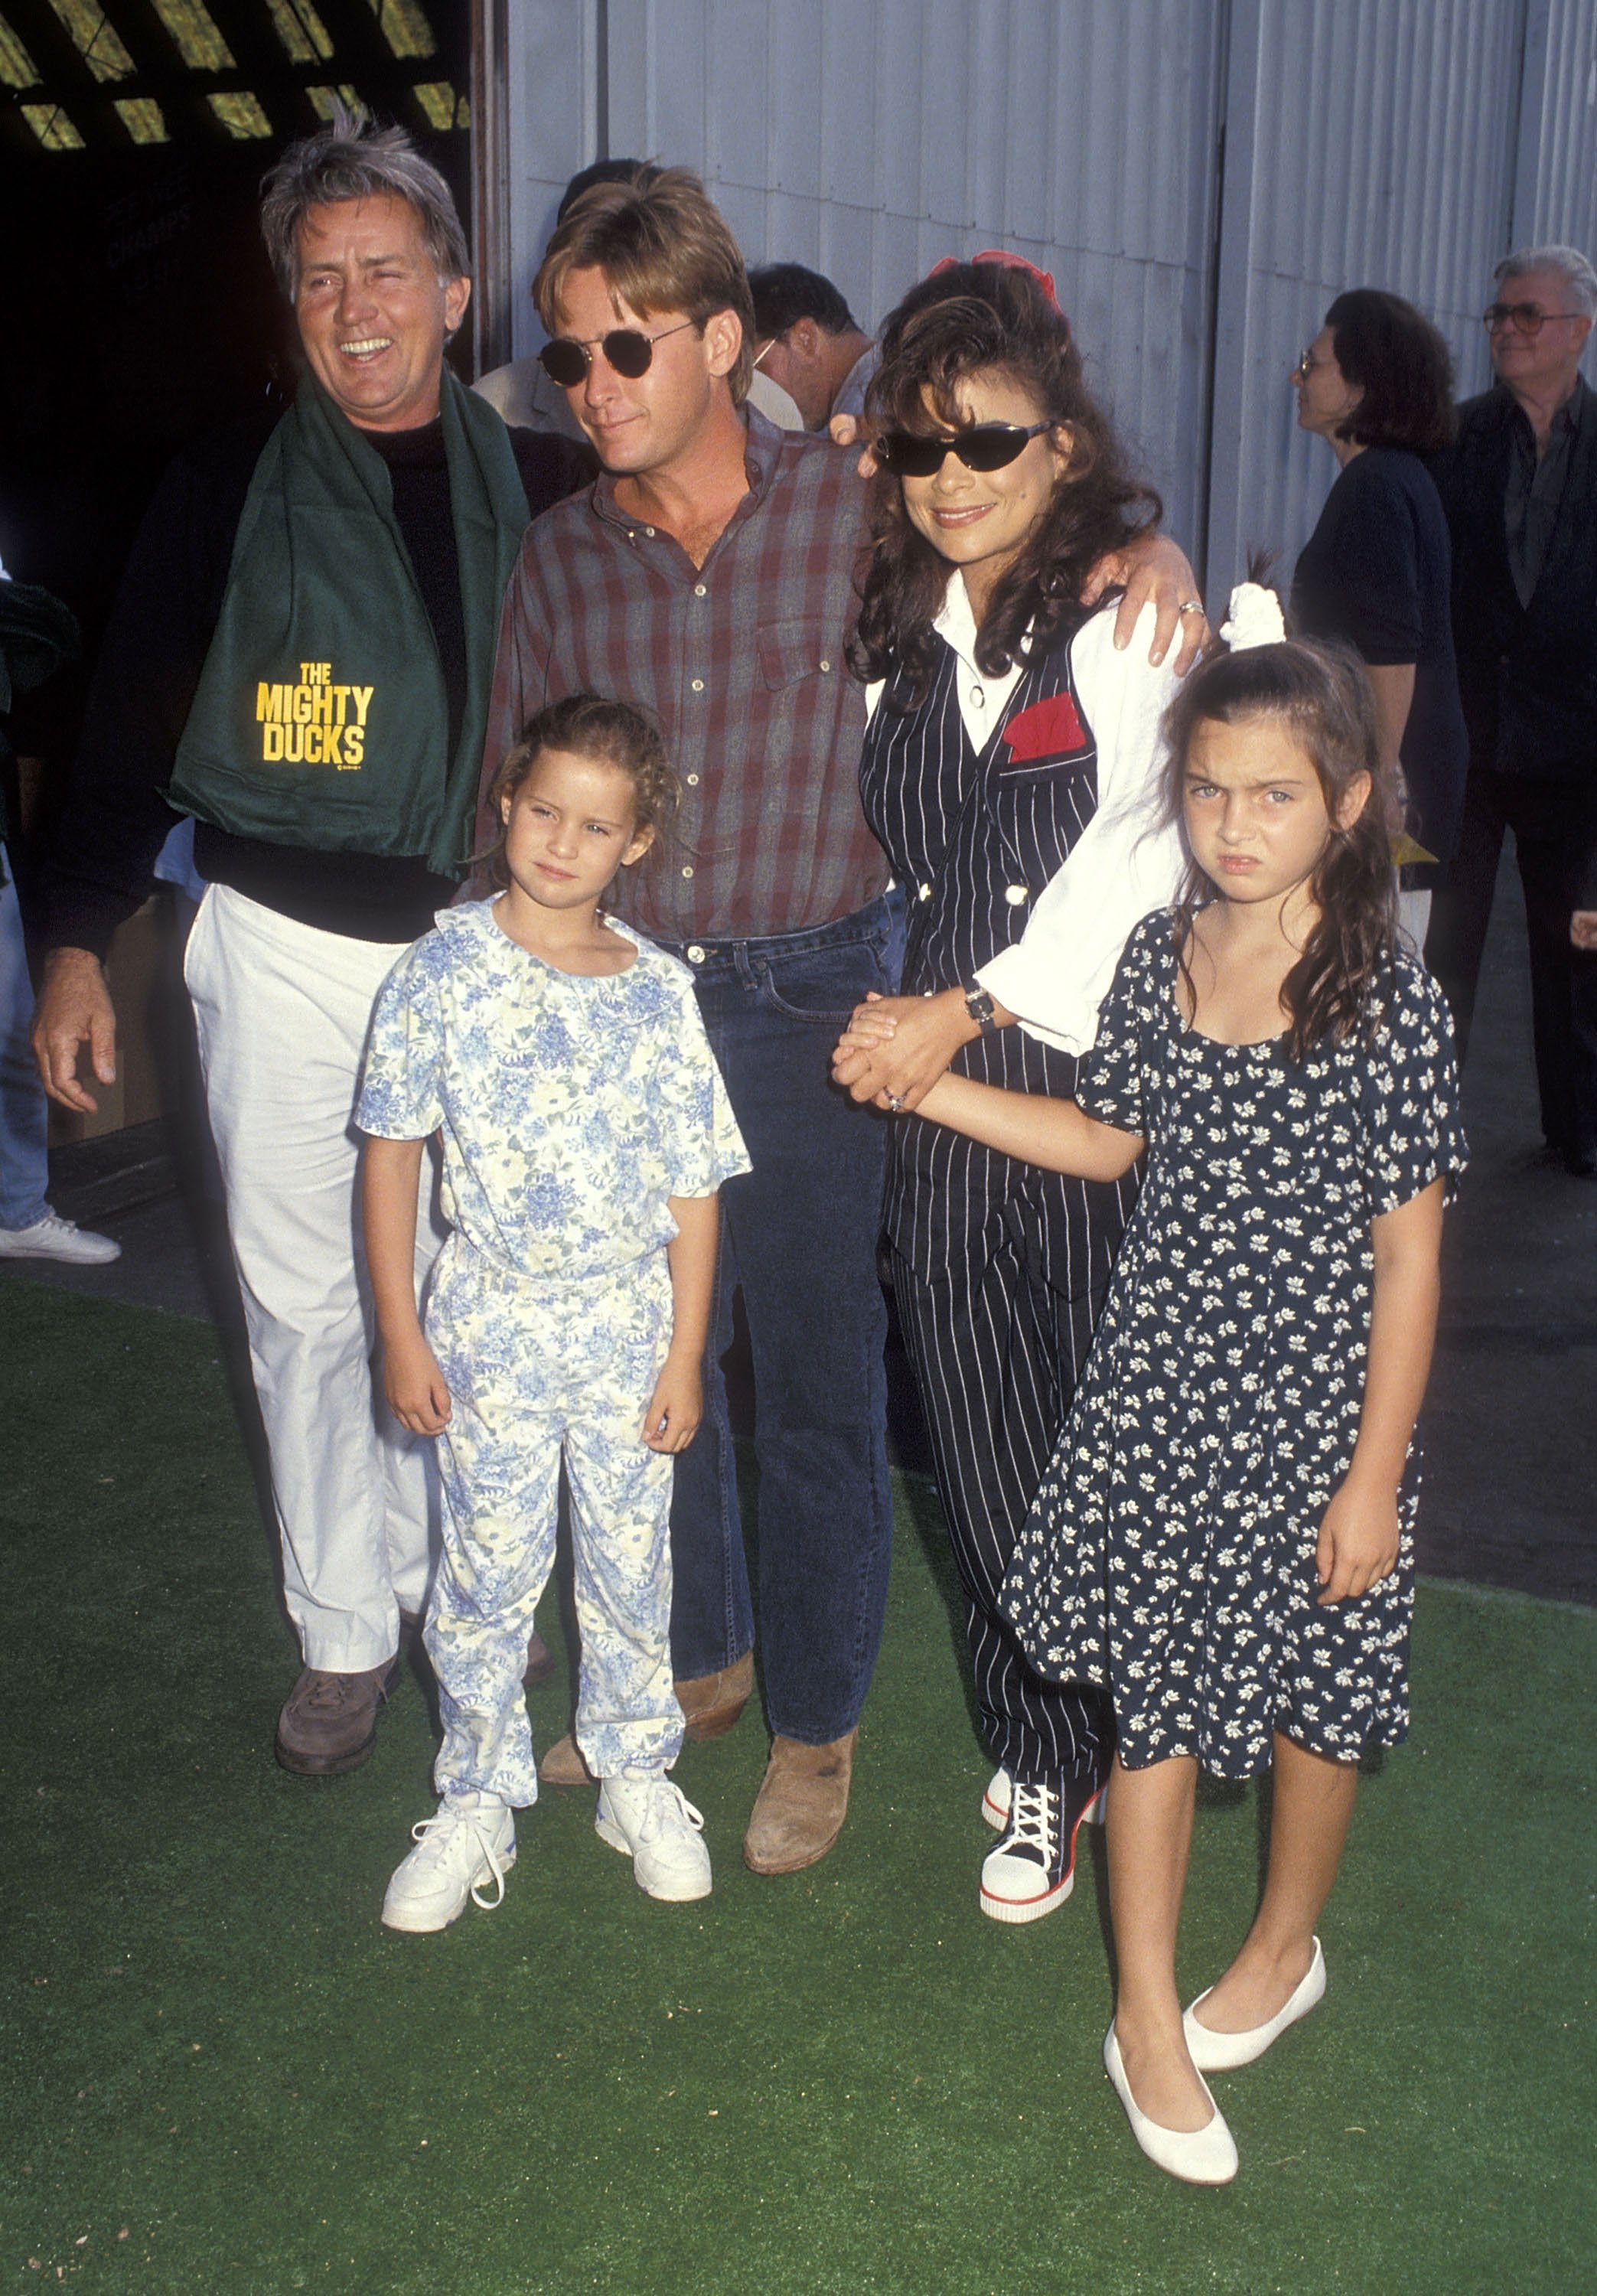 Actor Martin Sheen, singer Paula Abdul, actor Emilio Estevez, his daughter Paloma Estevez and his niece Cassandra Jade Estevez attend "The Mighty Ducks" Westwood Premiere on September 20, 1992, at the Avco Center Cinemas, in Westwood, California. | Source: Getty Images